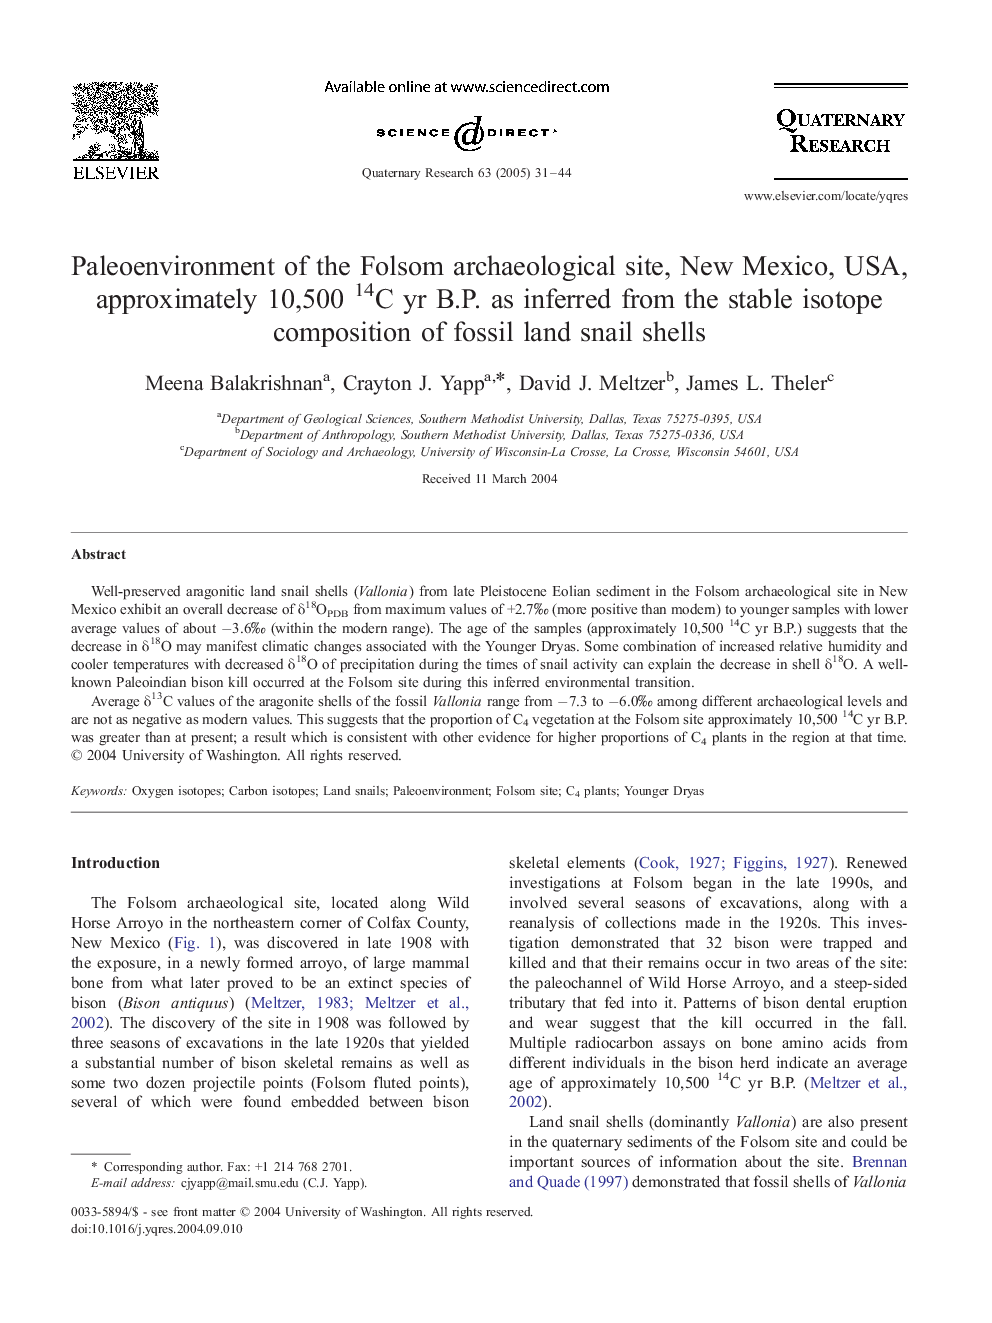 Paleoenvironment of the Folsom archaeological site, New Mexico, USA, approximately 10,500 14C yr B.P. as inferred from the stable isotope composition of fossil land snail shells